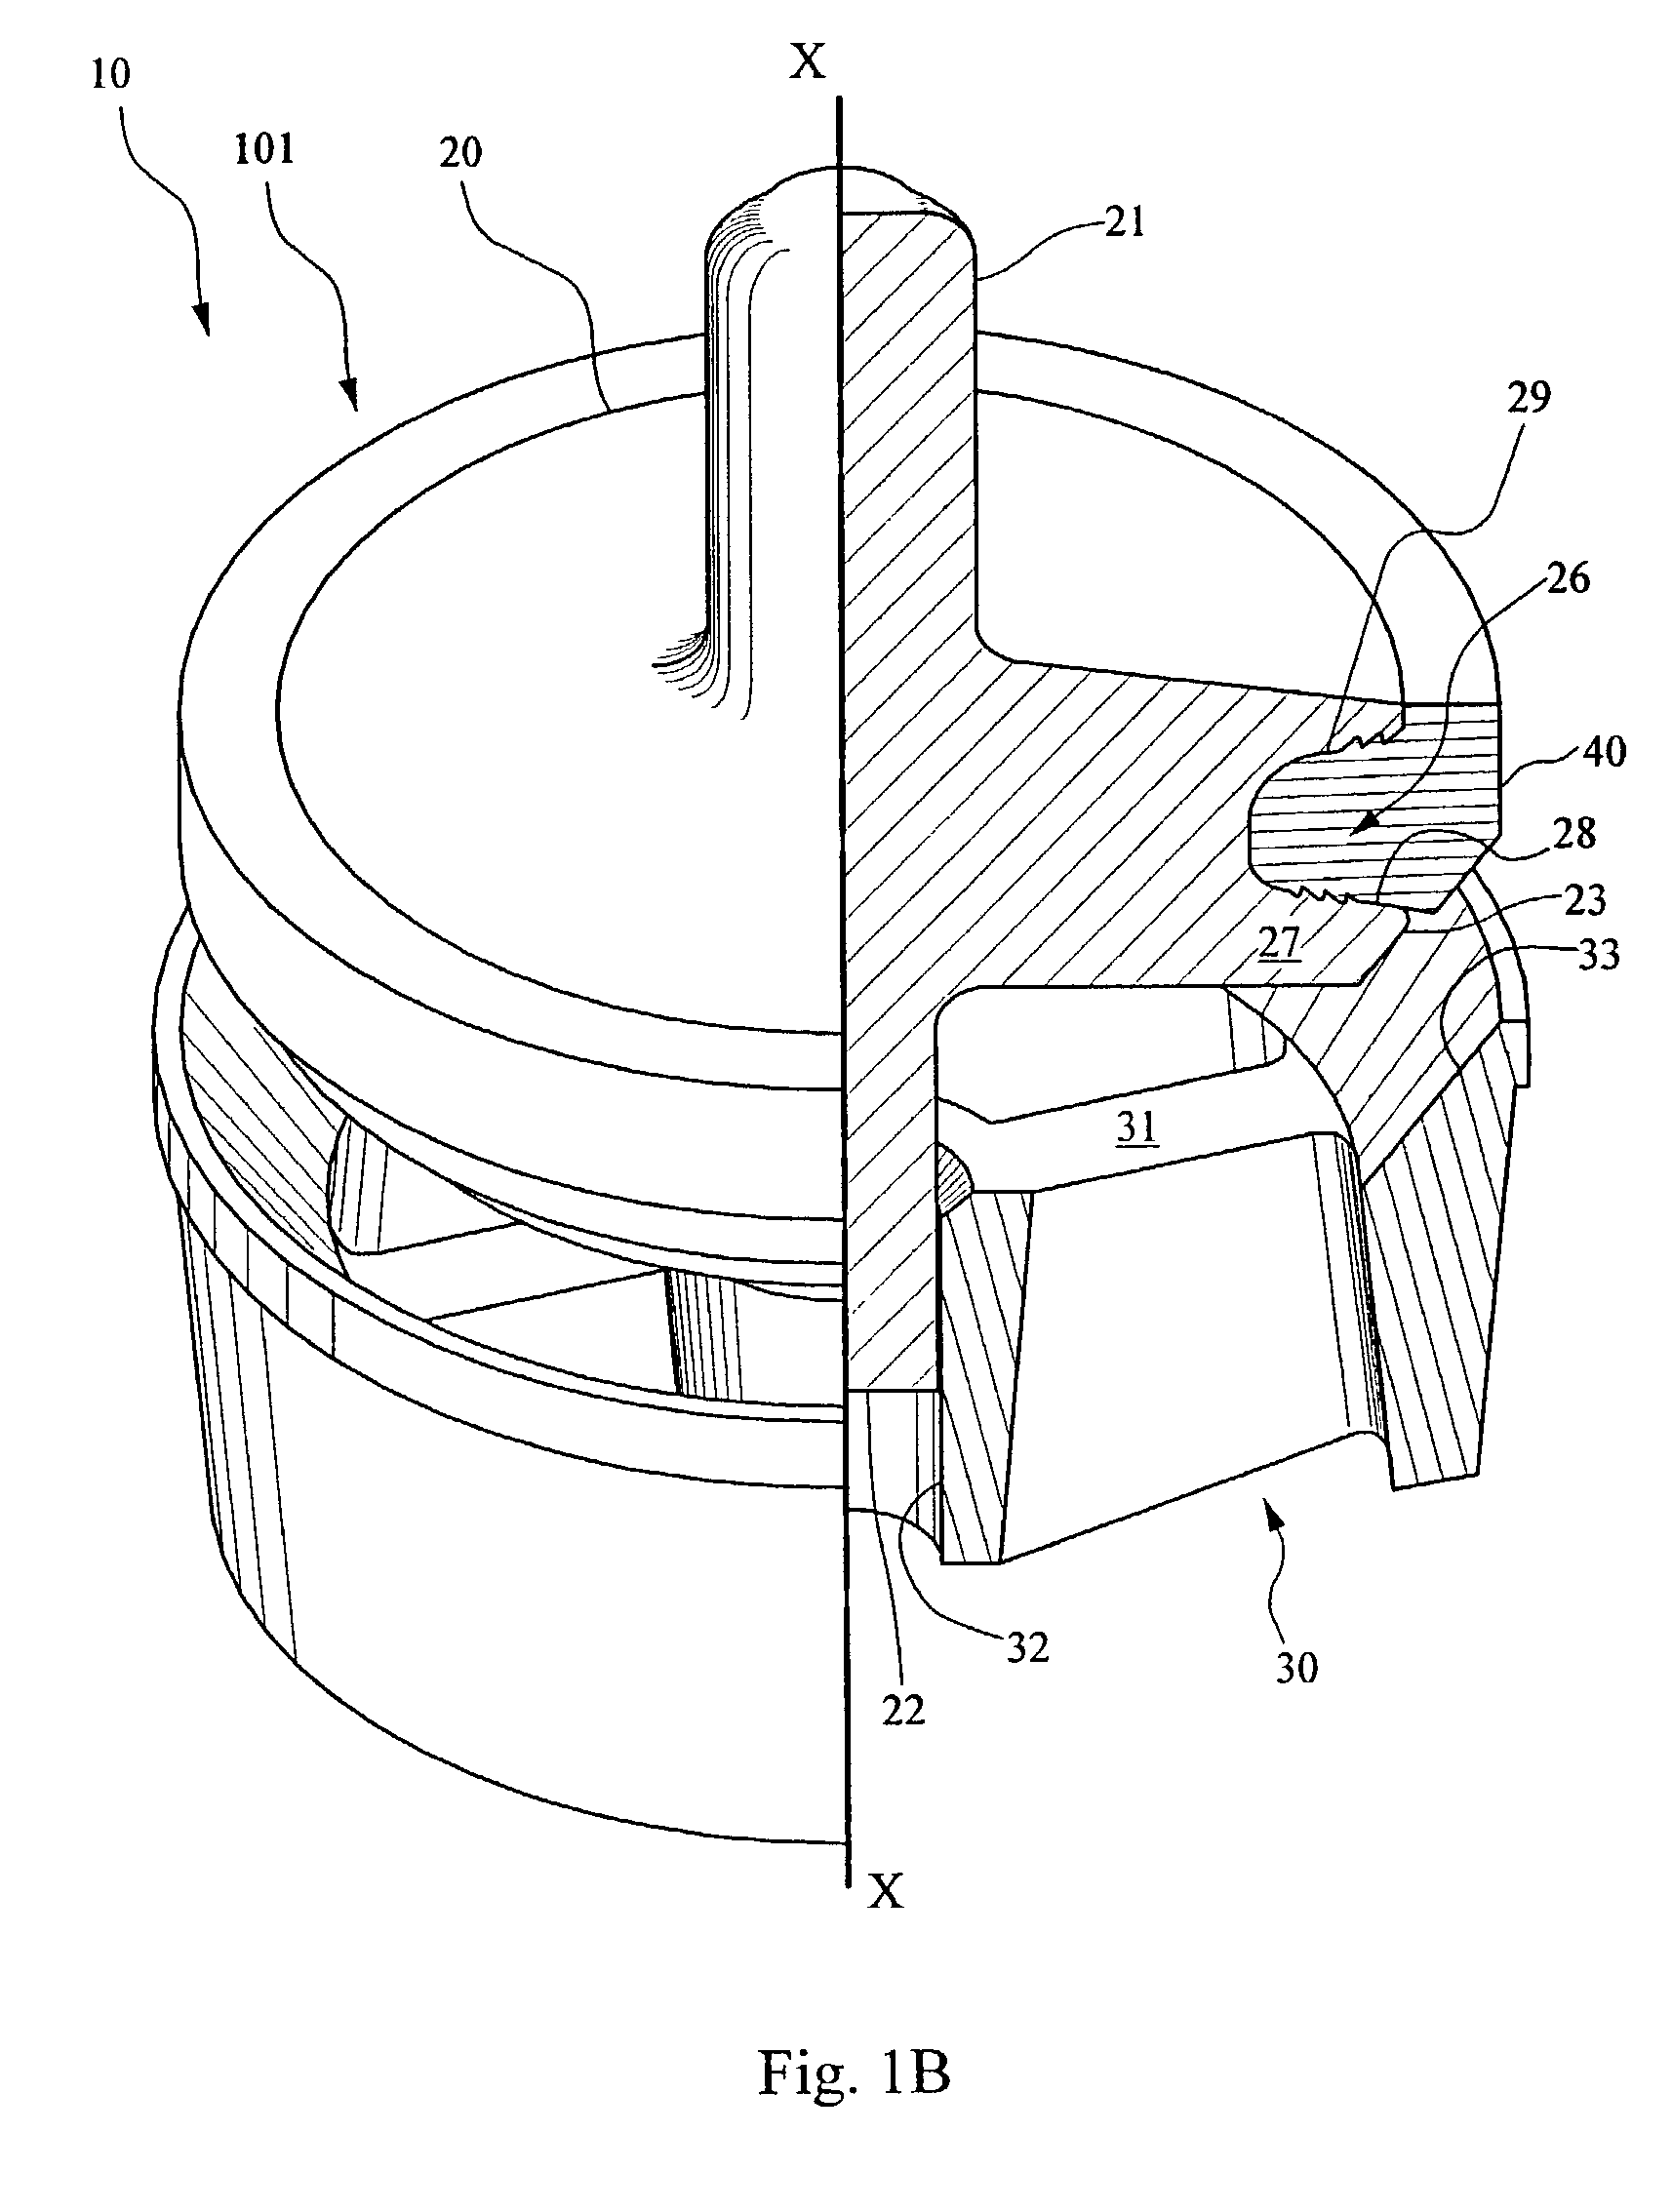 Valve body and seal assembly